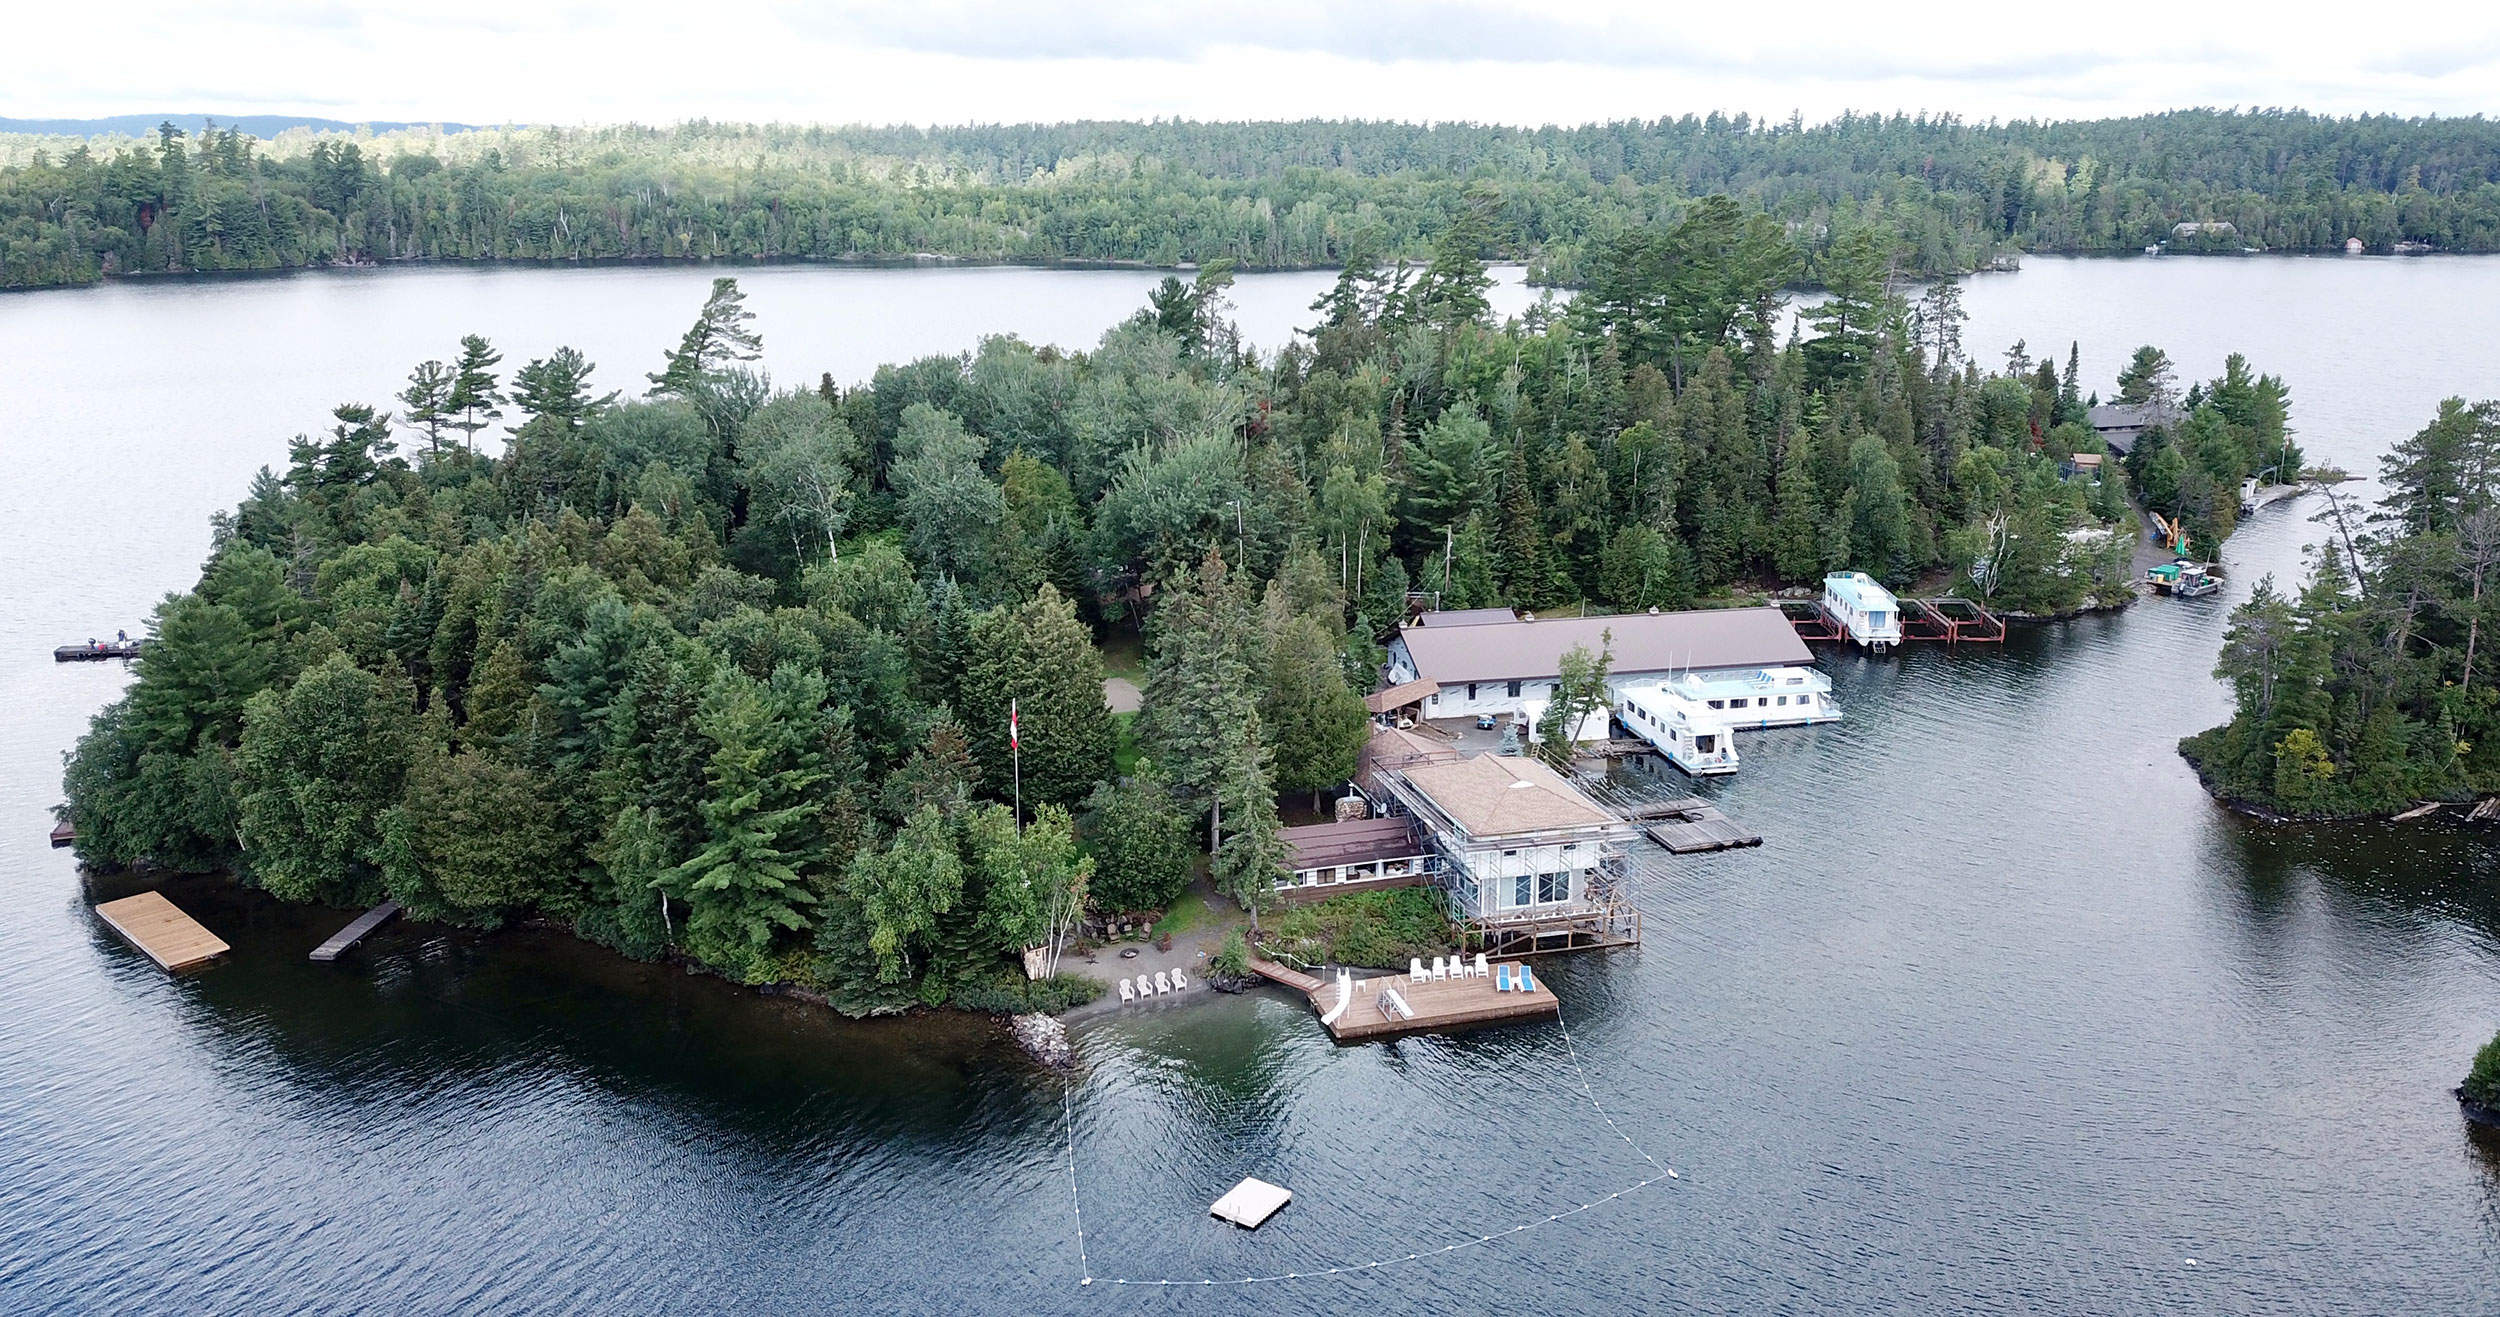 Canusa Vacations is located on an island in Lake Temagami